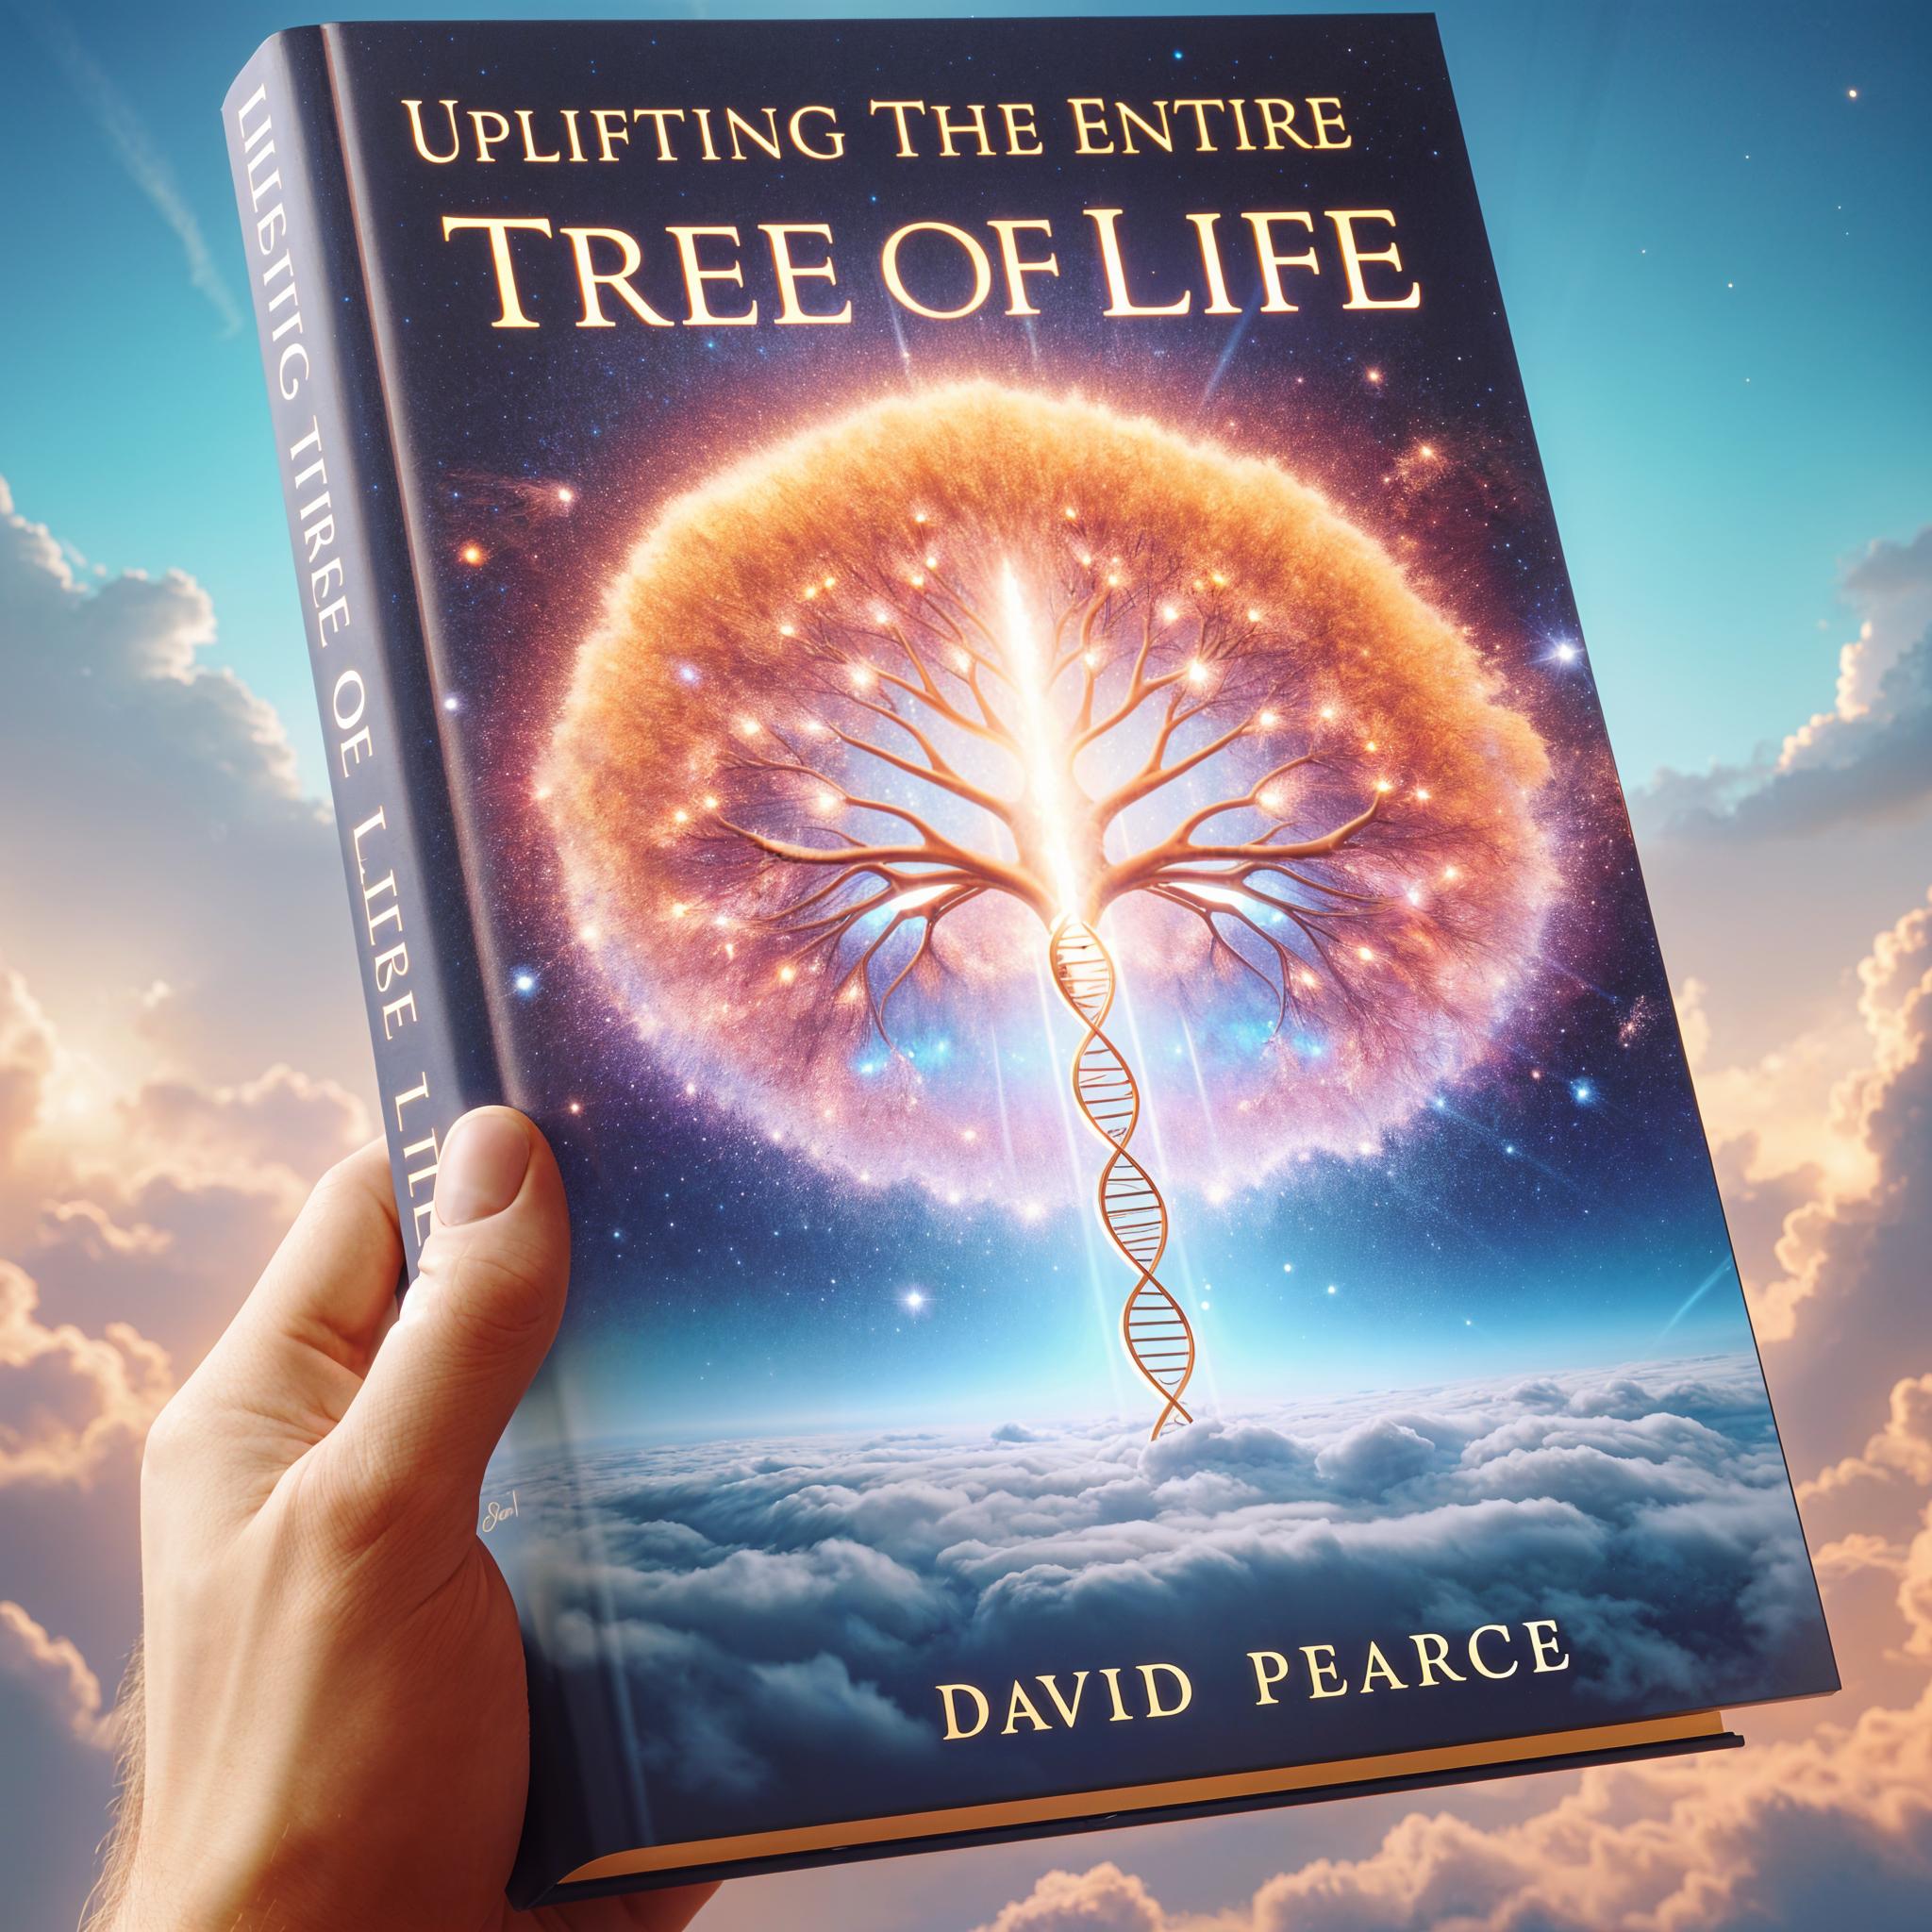 Uplifting the Entire Tree of Life by David Pearce